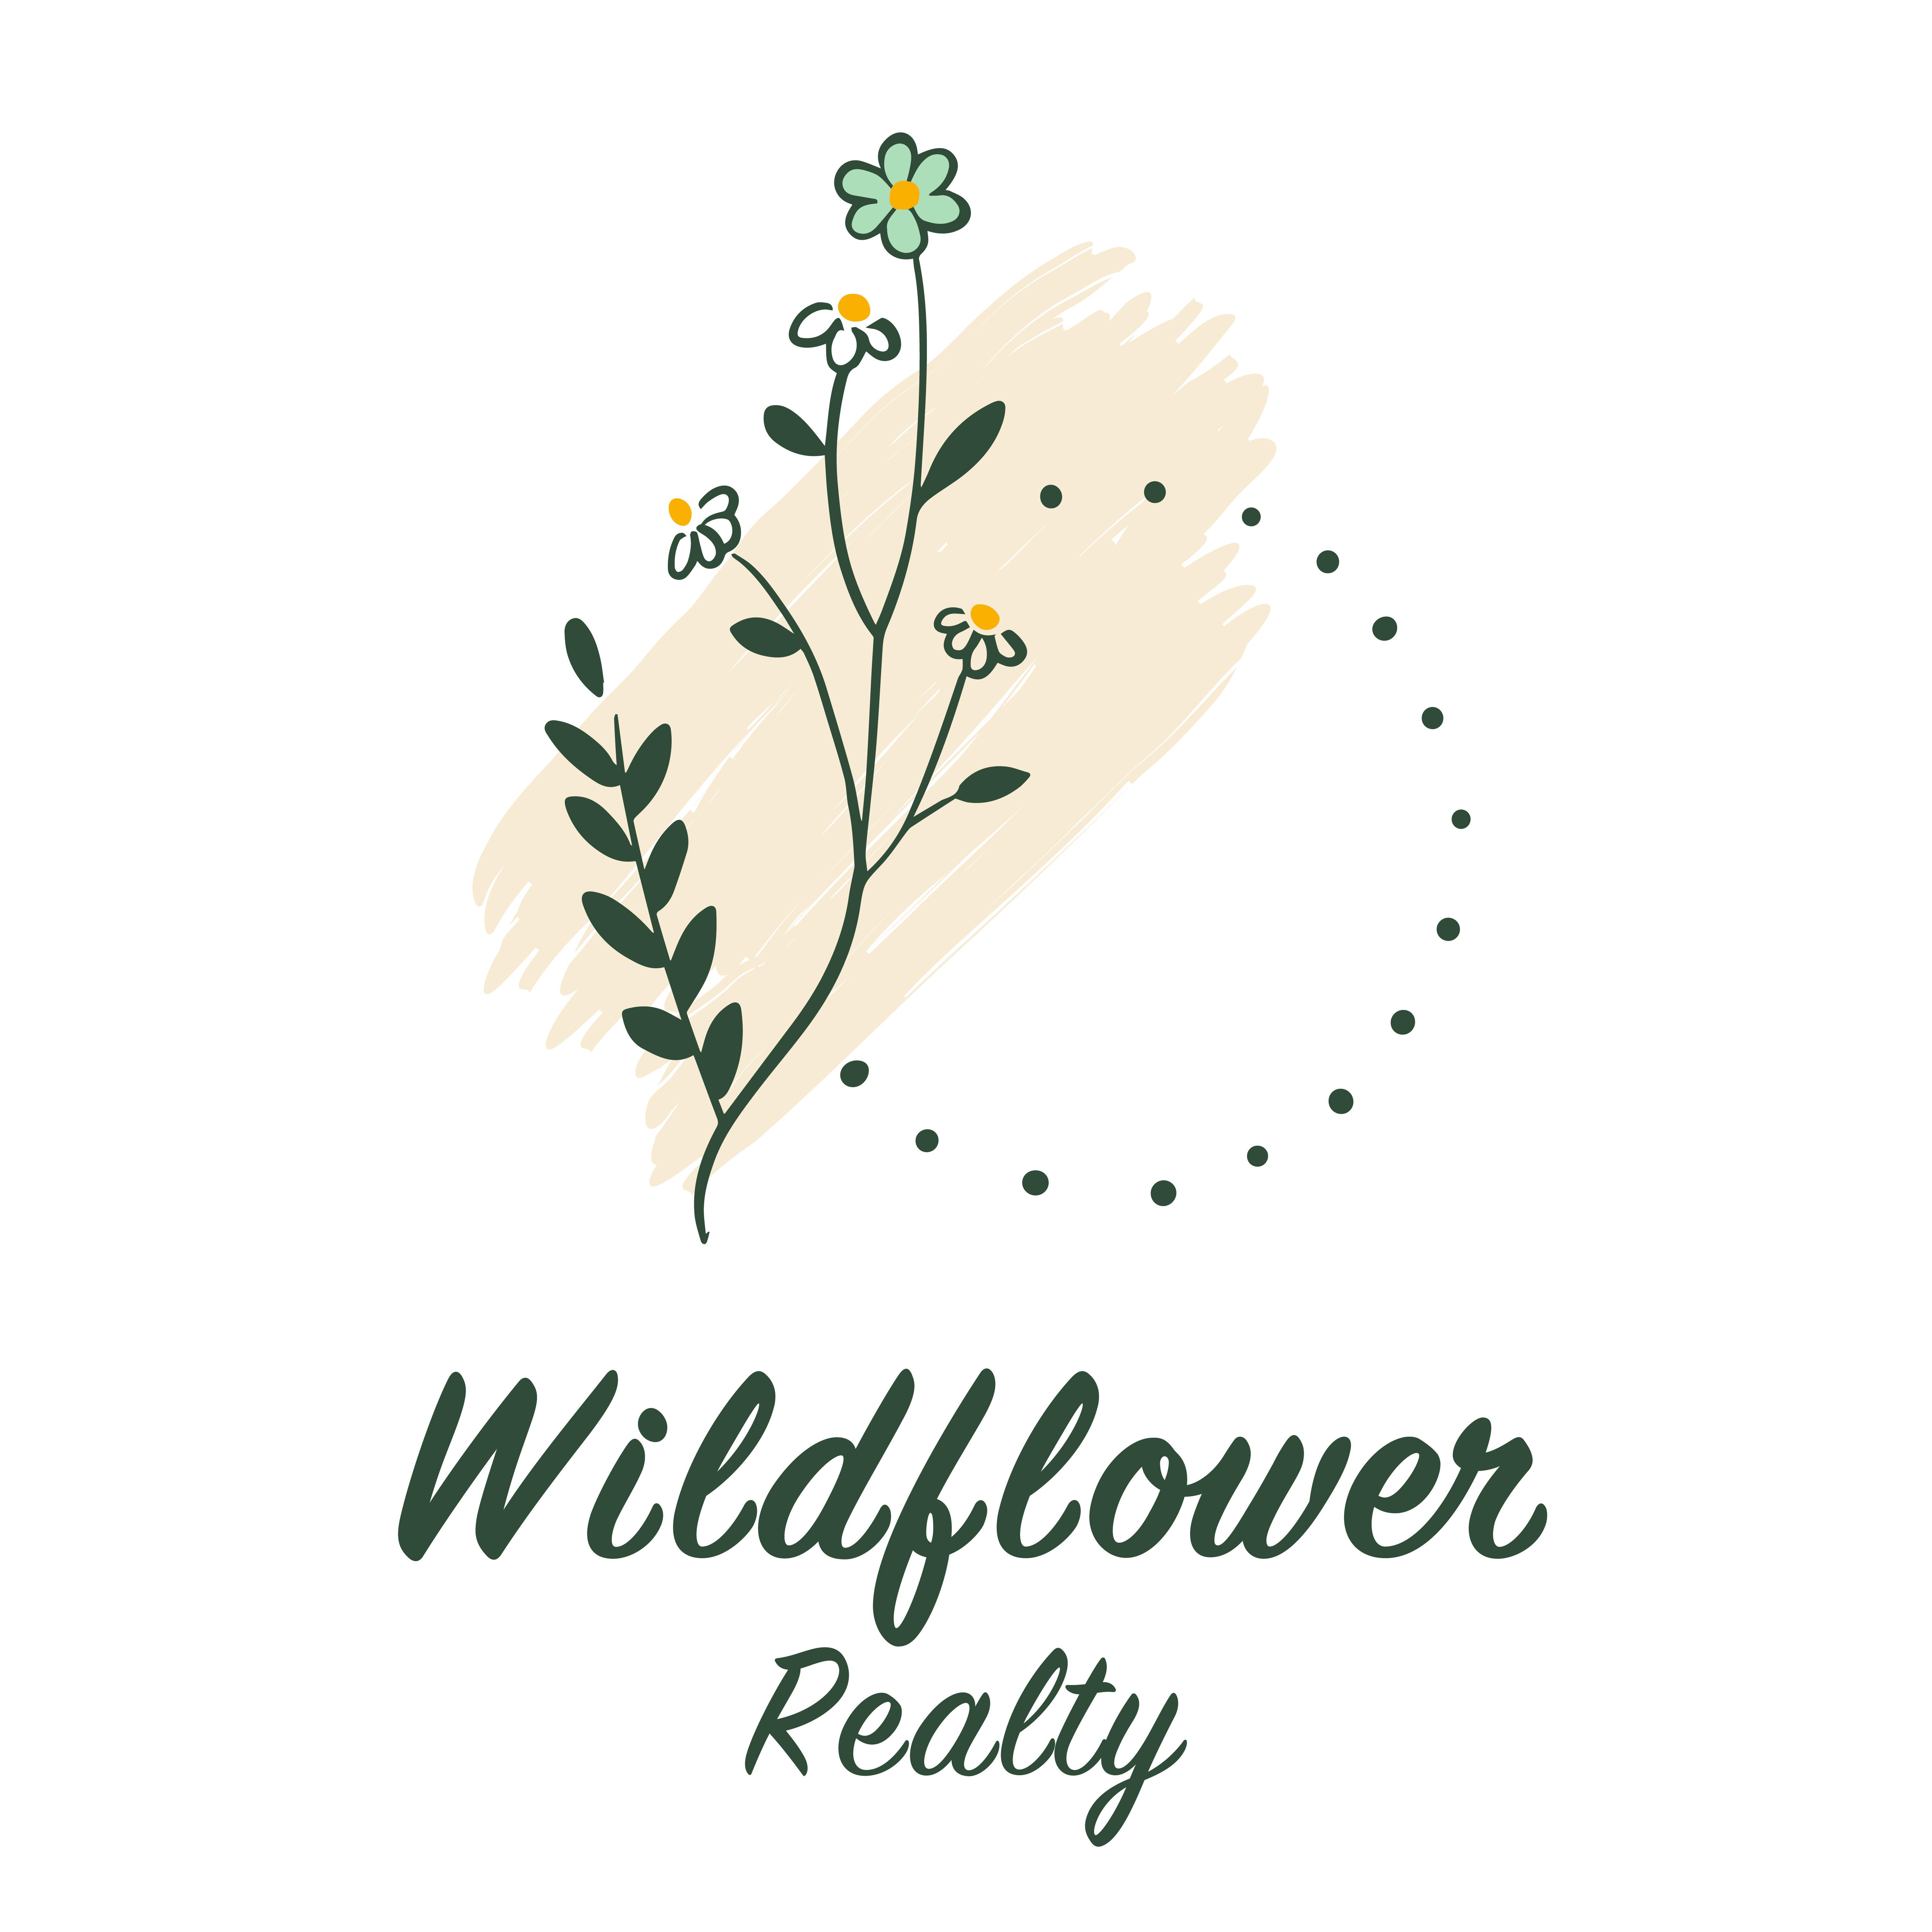 Wildflower Realty - Evergreen, CO 80439 - (303)953-8288 | ShowMeLocal.com